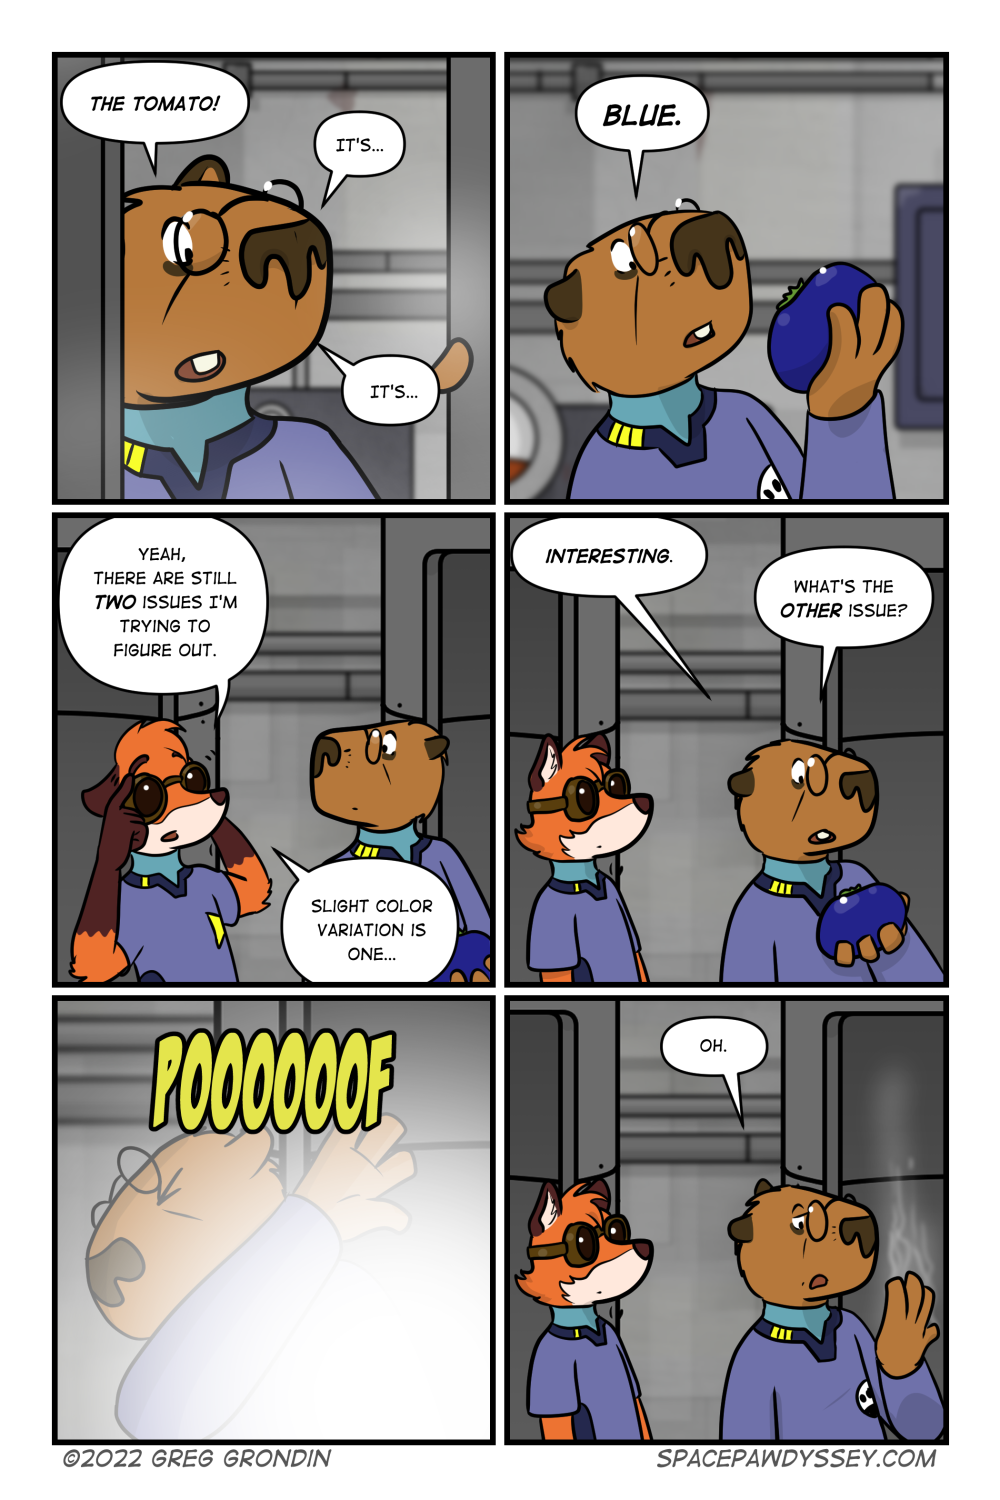 Space Pawdyssey #559